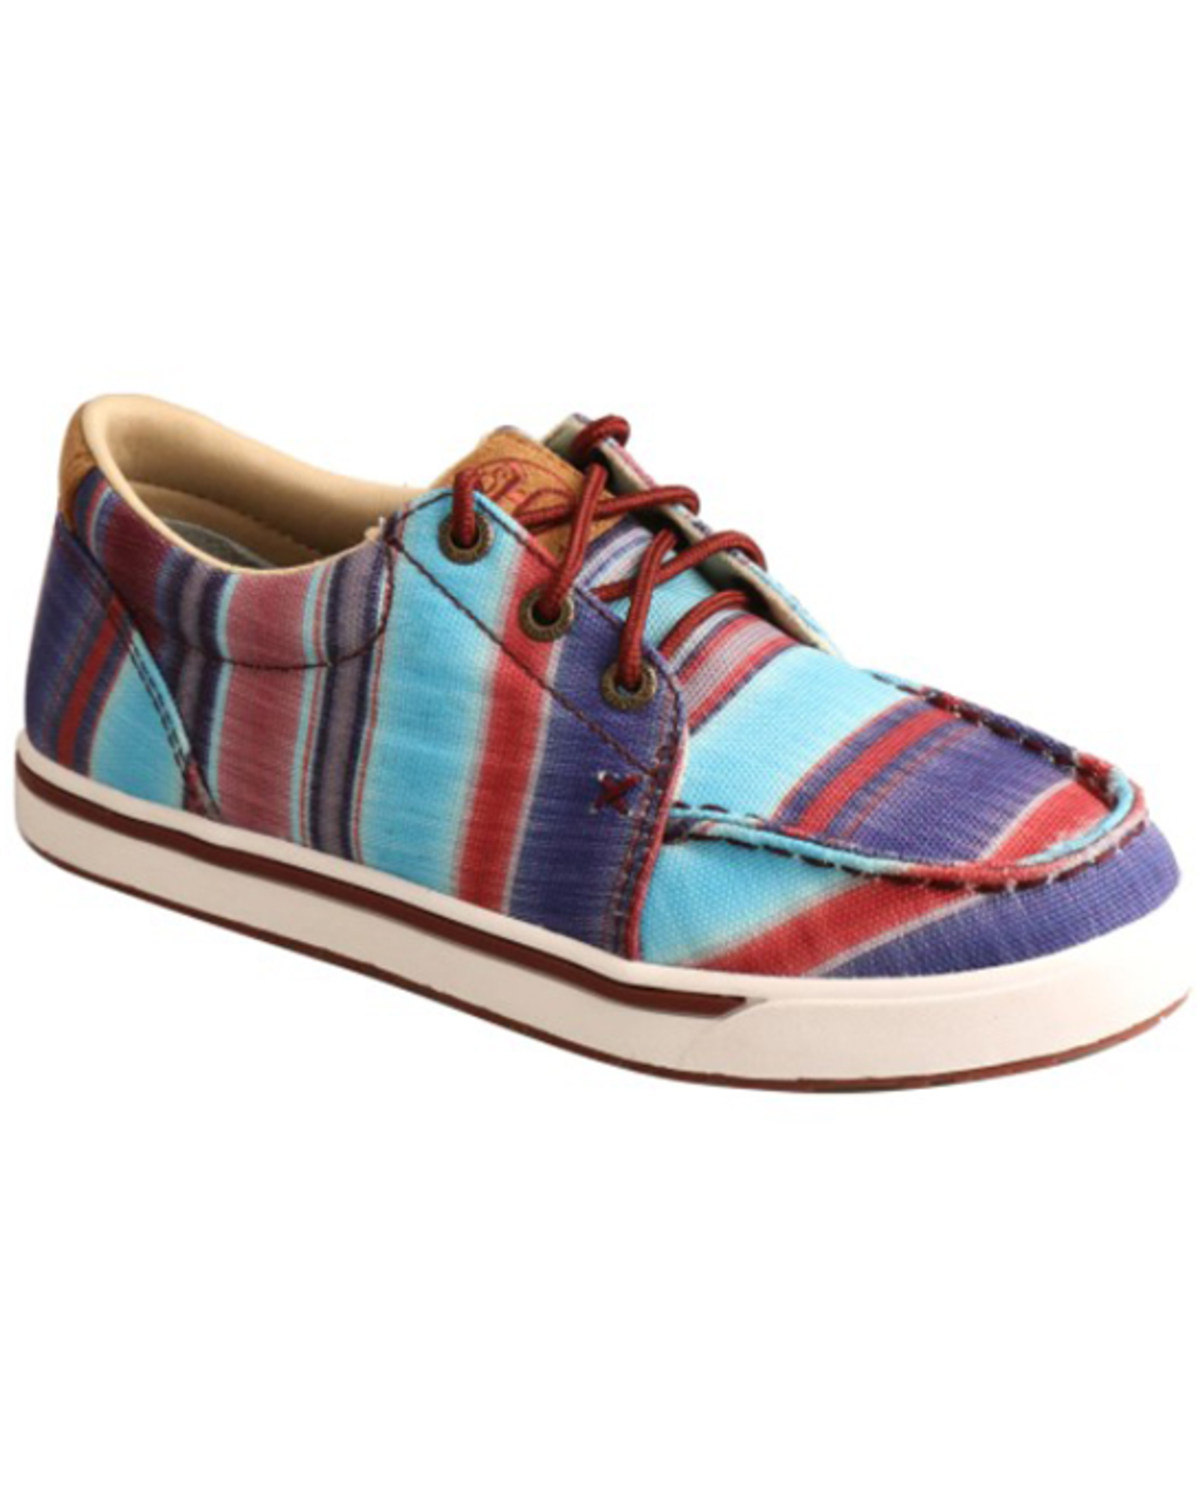 Hooey by Twisted X Kids' Serape Print Lace-Up Casual Lopers